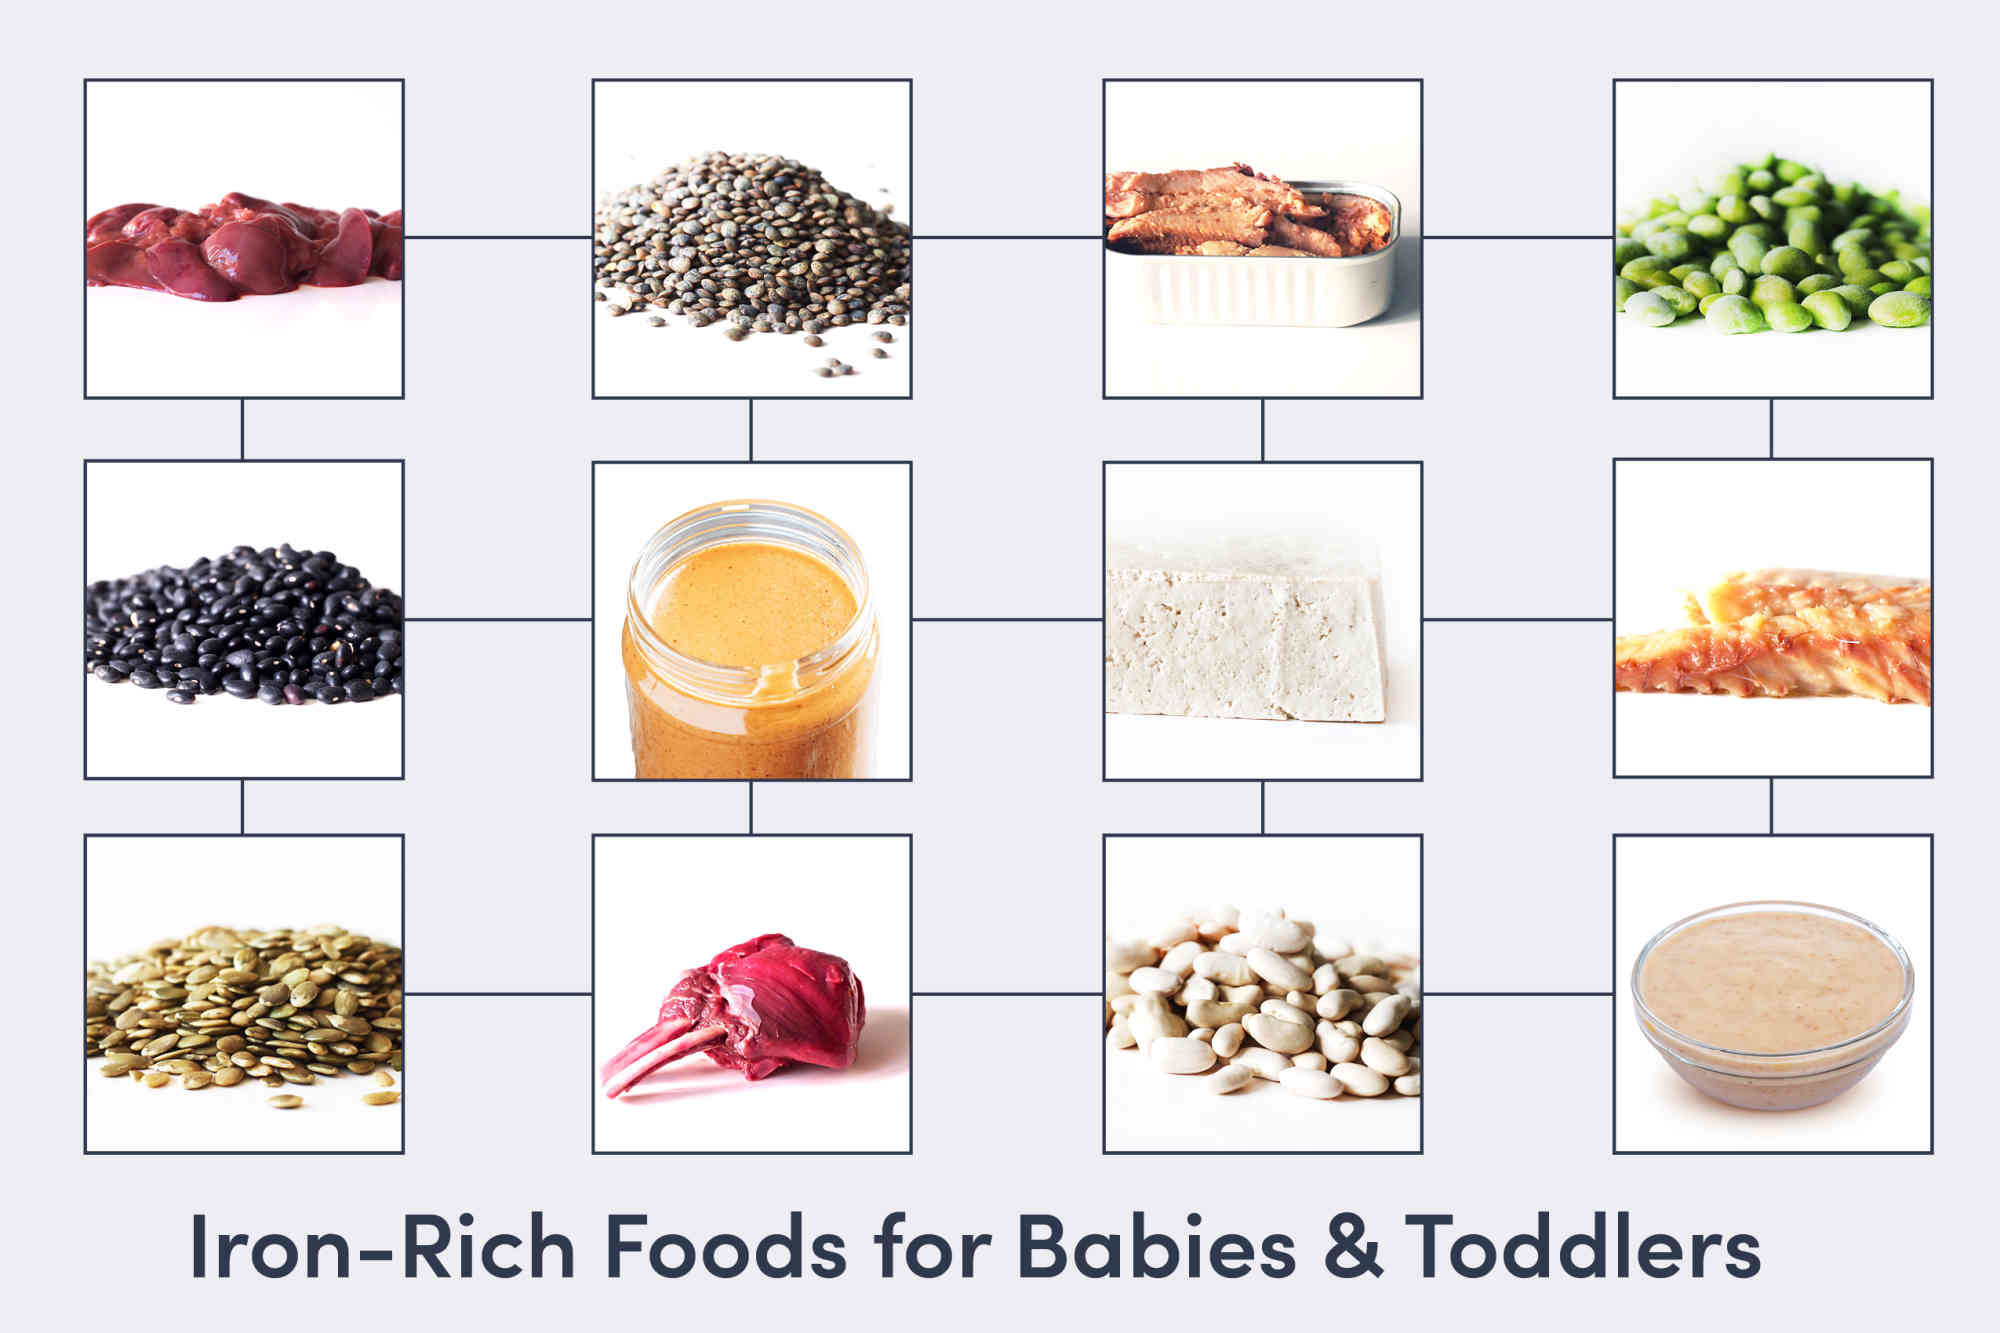 Iron-rich foods for babies and toddlers, the best options include liver, beans, and more. Learn the best foods to help your baby get more iron.